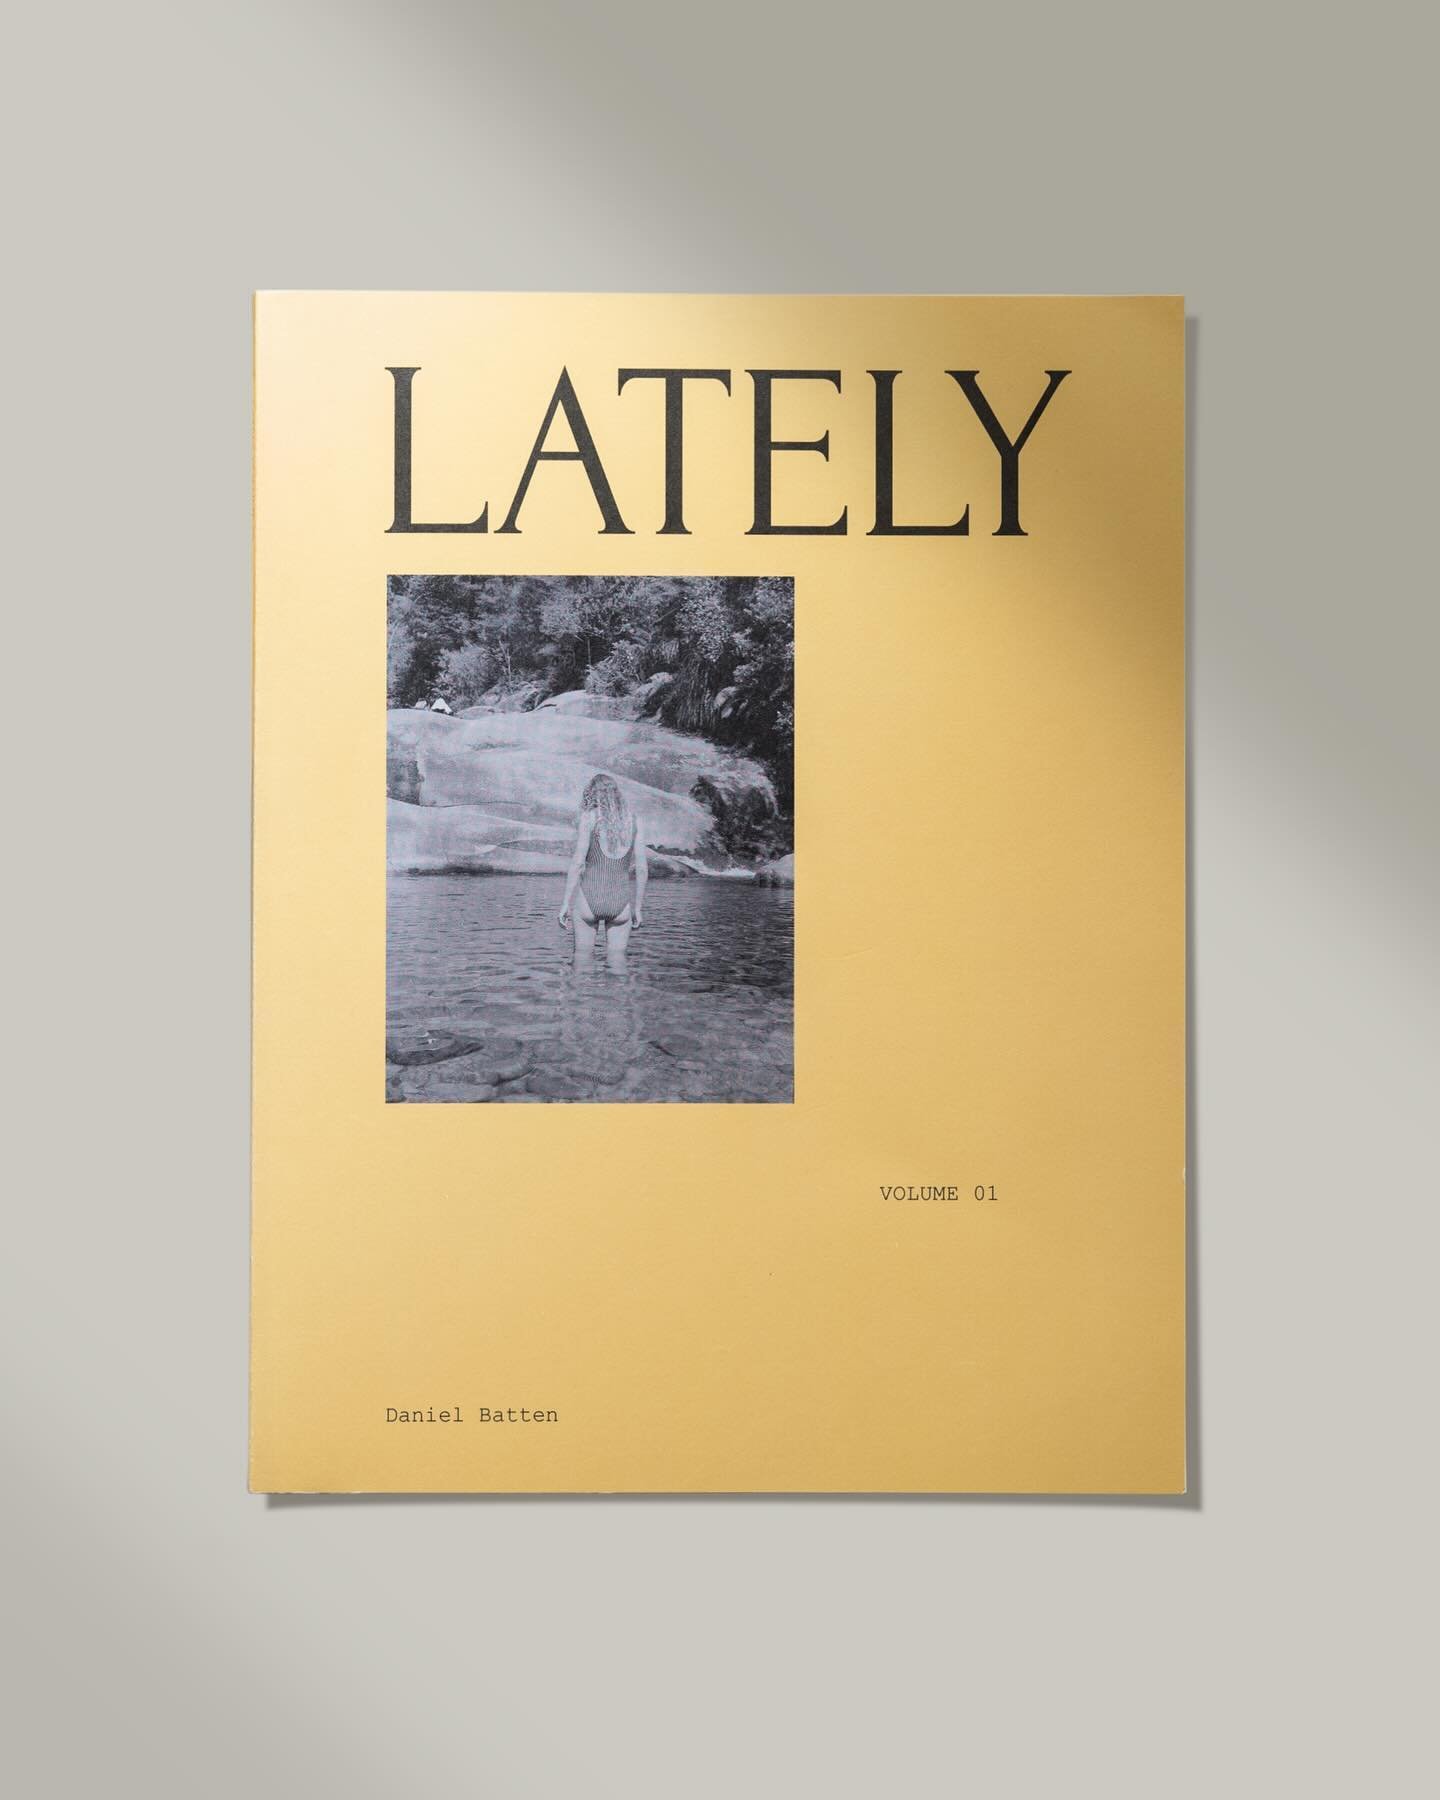 📙 New book 📙

Lately is a lightly curated visual diary of a period in time - a current catalogue of what I have shot lately. Through my eyes these are the people, places, and objects that catch my attention. 

This is an effort to put more physical